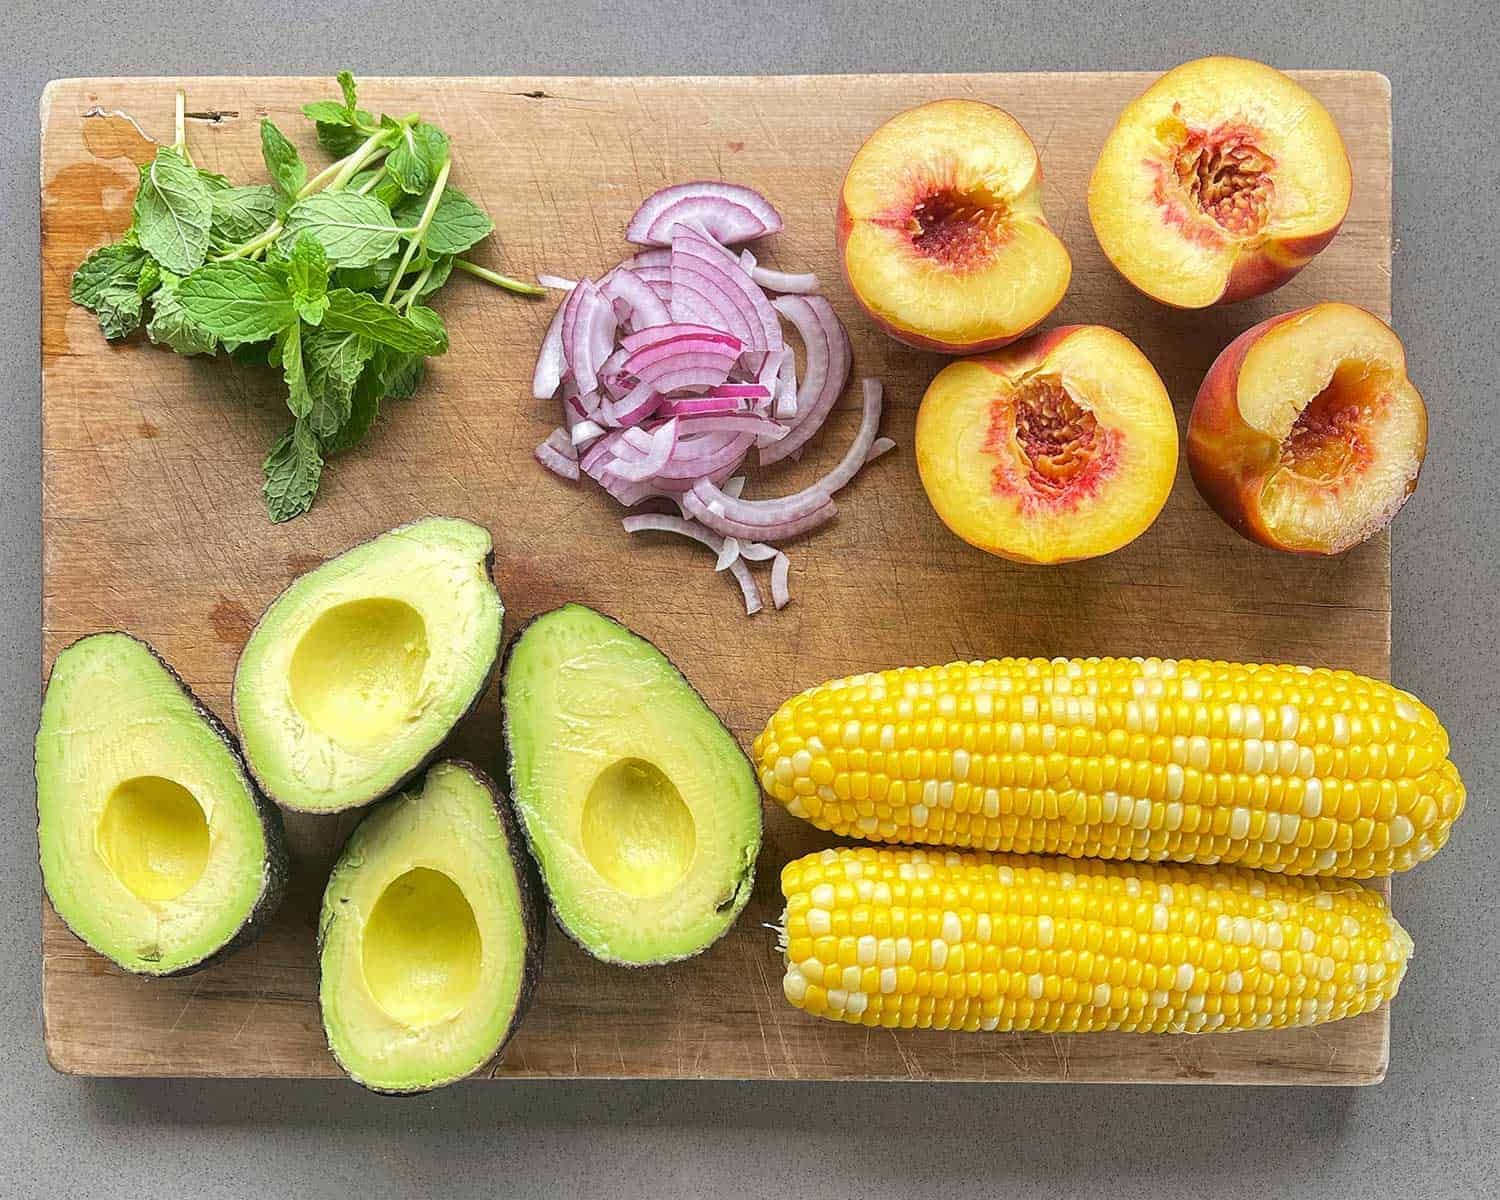 Avocado, mint, red onion, peach and corn on a wooden chopping board.